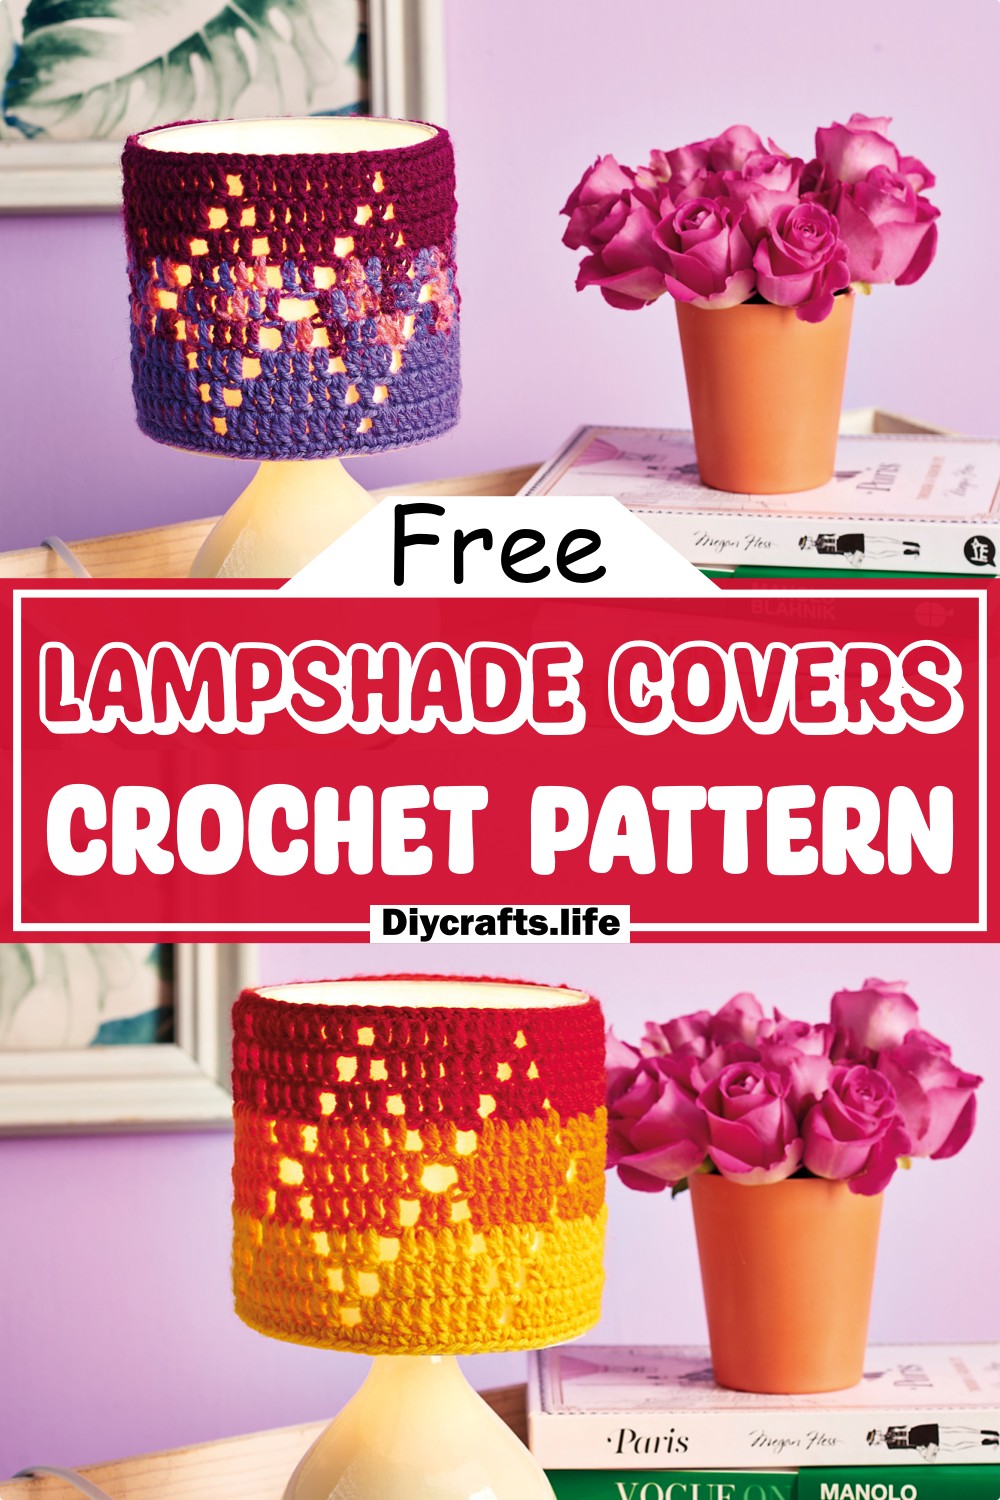 Pattern For Crochet Lampshade Covers